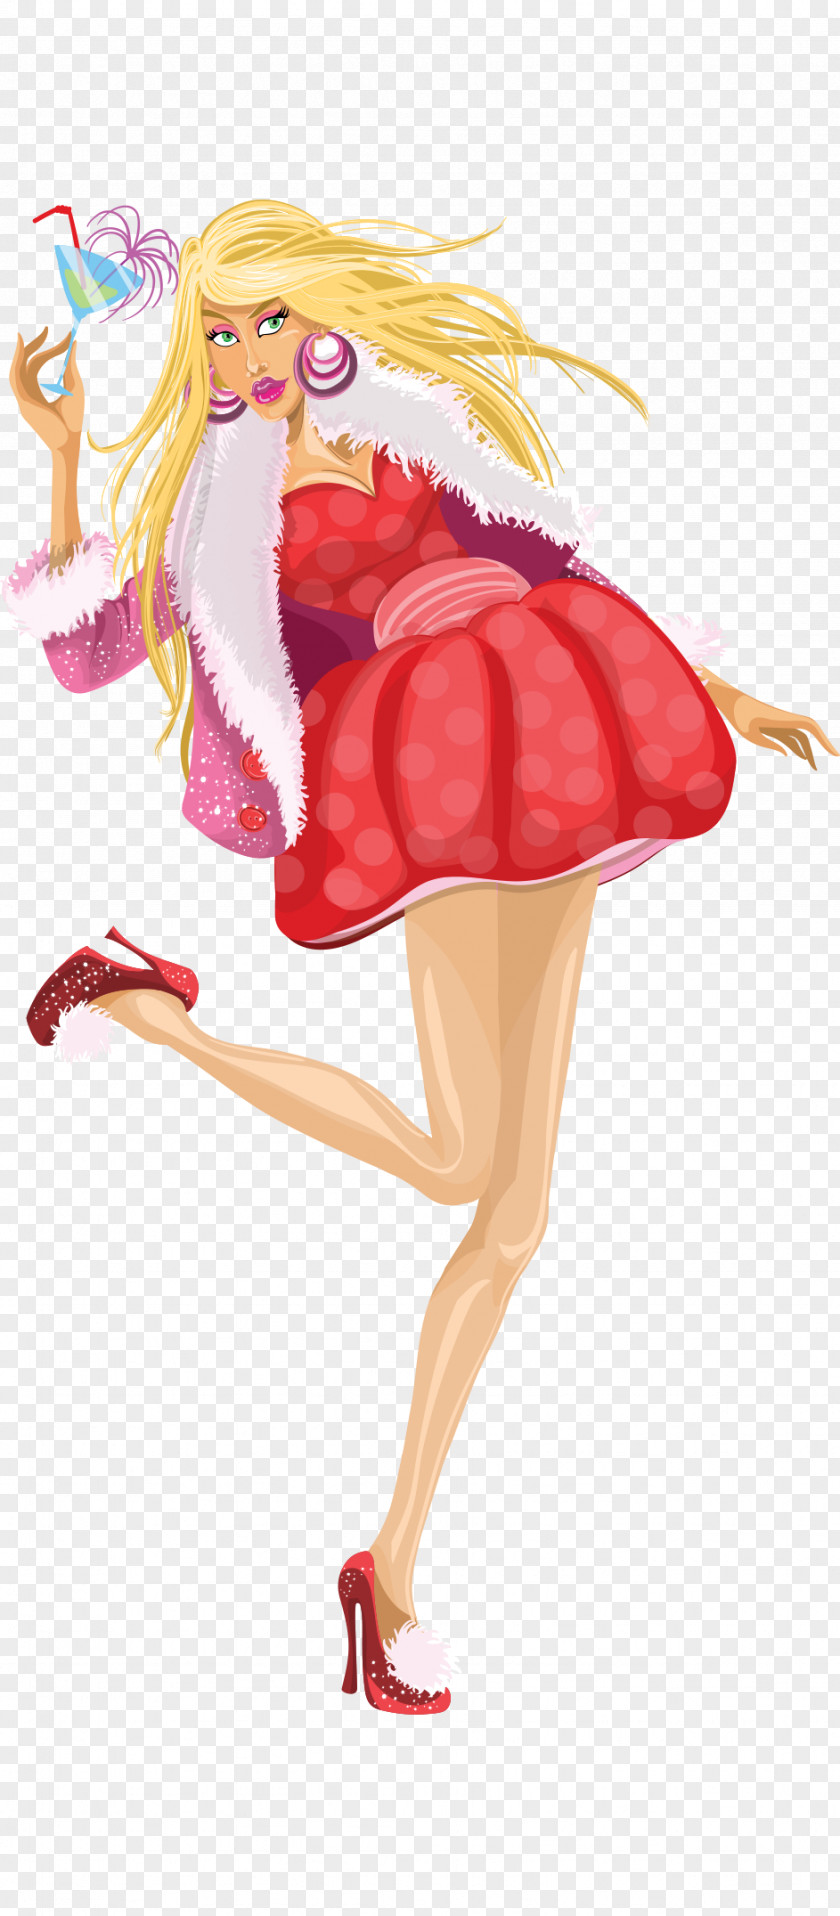 Hand Drawn Cartoon Blonde Beauty Red Cocktail Dress Illustration PNG